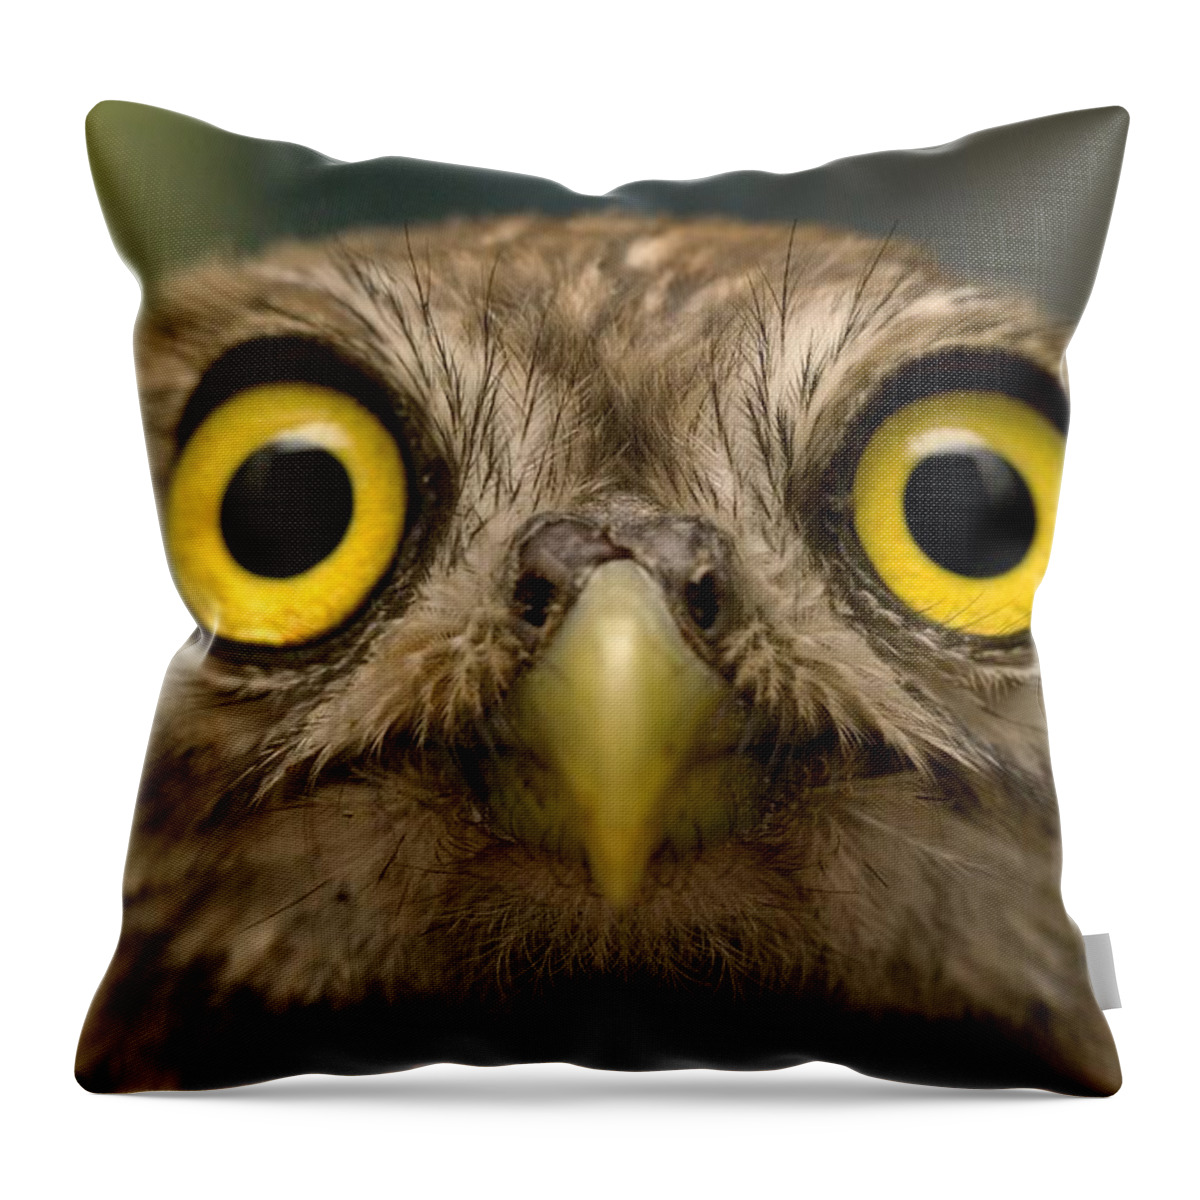 Estock Throw Pillow featuring the digital art Owl, Italy by Angelo Giampiccolo